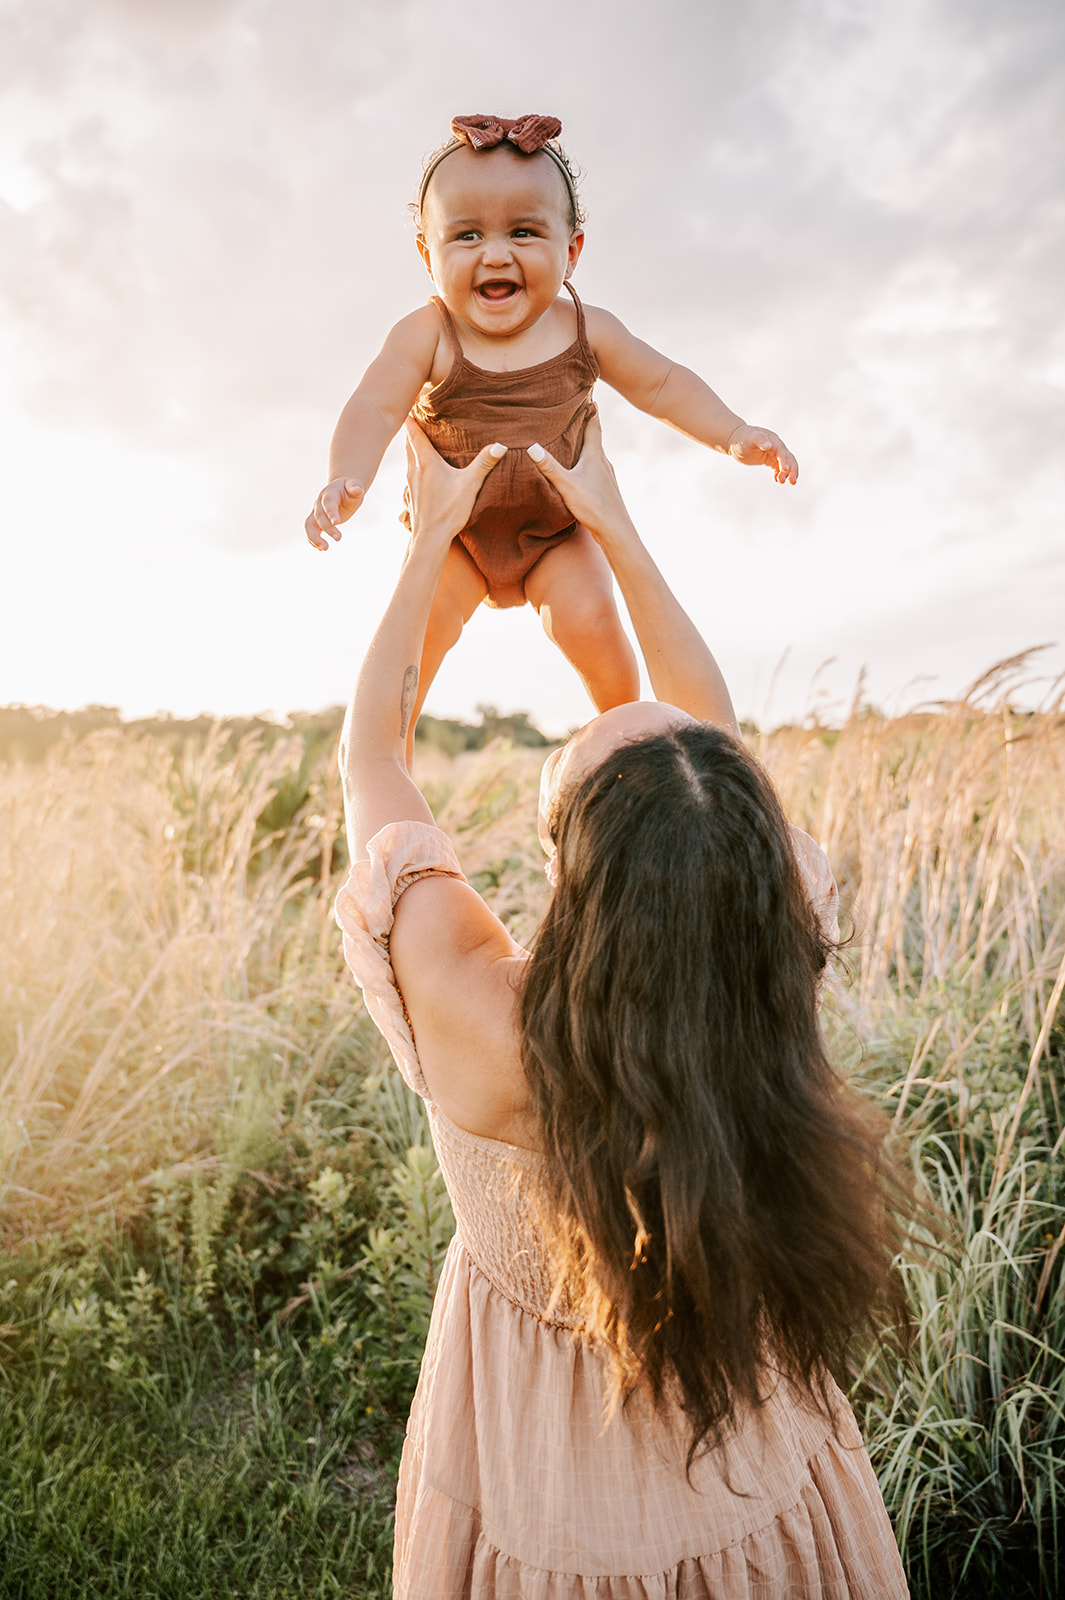 A mother lifts her toddler daughter high over her head while playing in a field of tall grasses at sunset